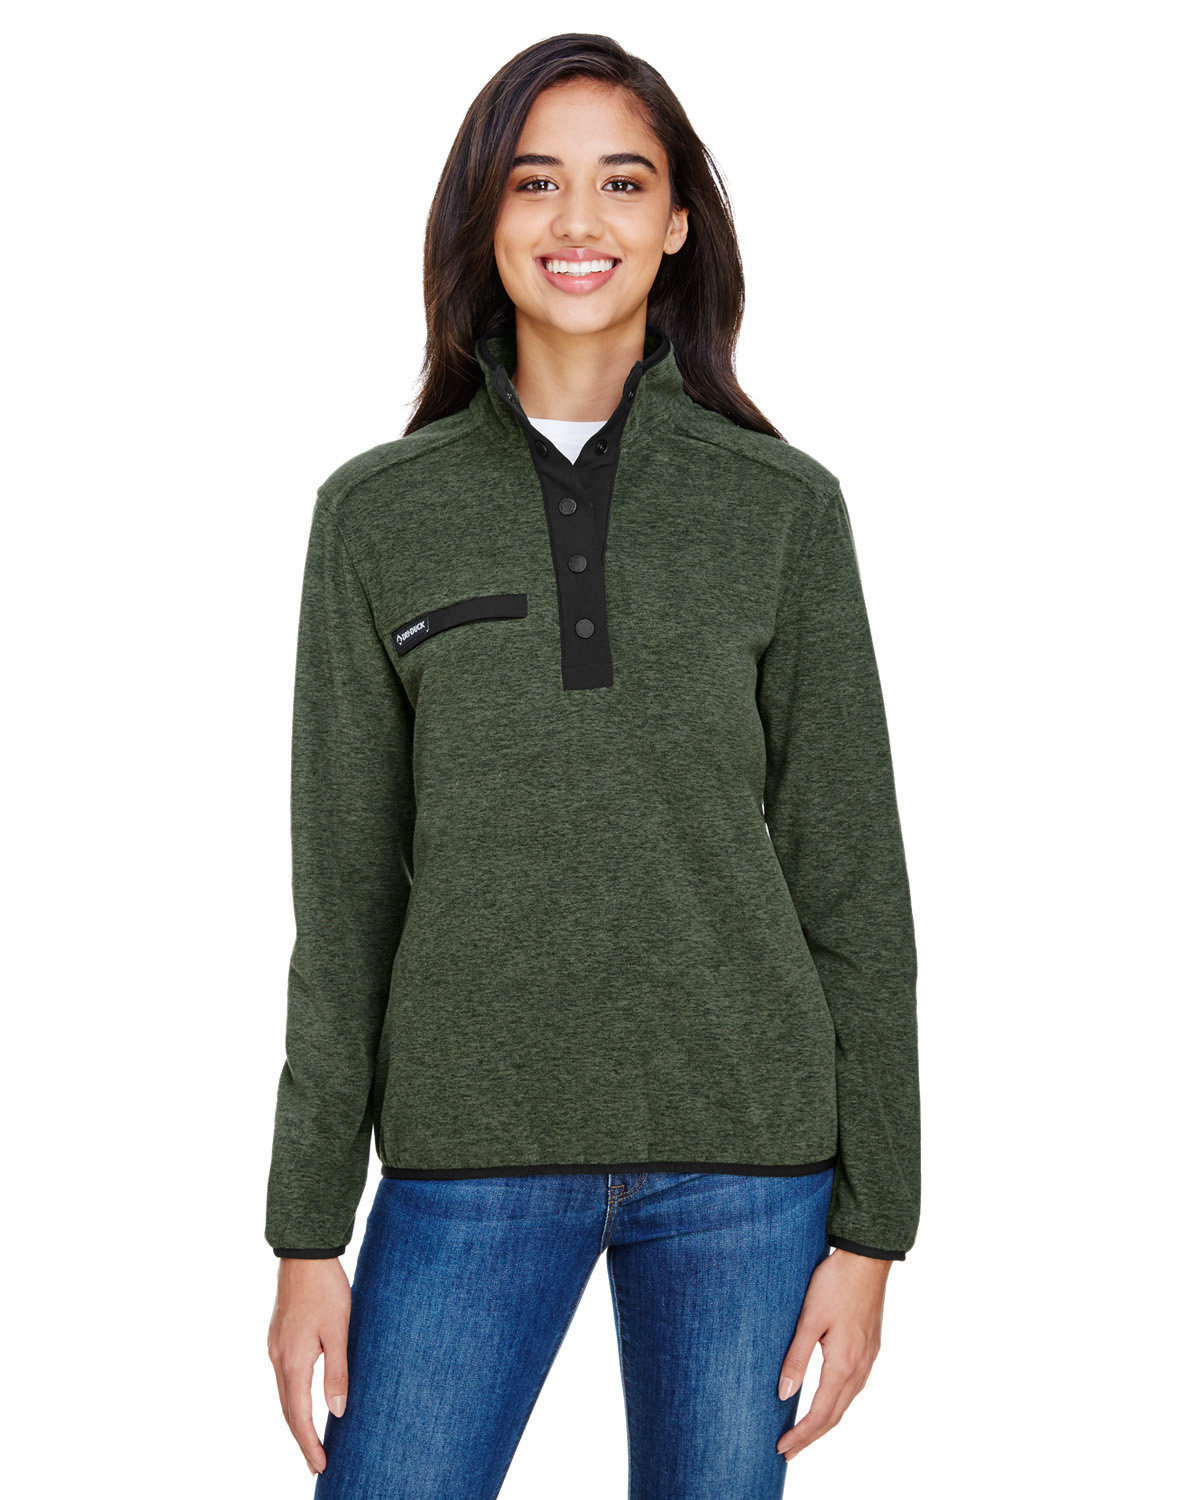 Front view of Aspen M Nge Mountain Fleece Pullover